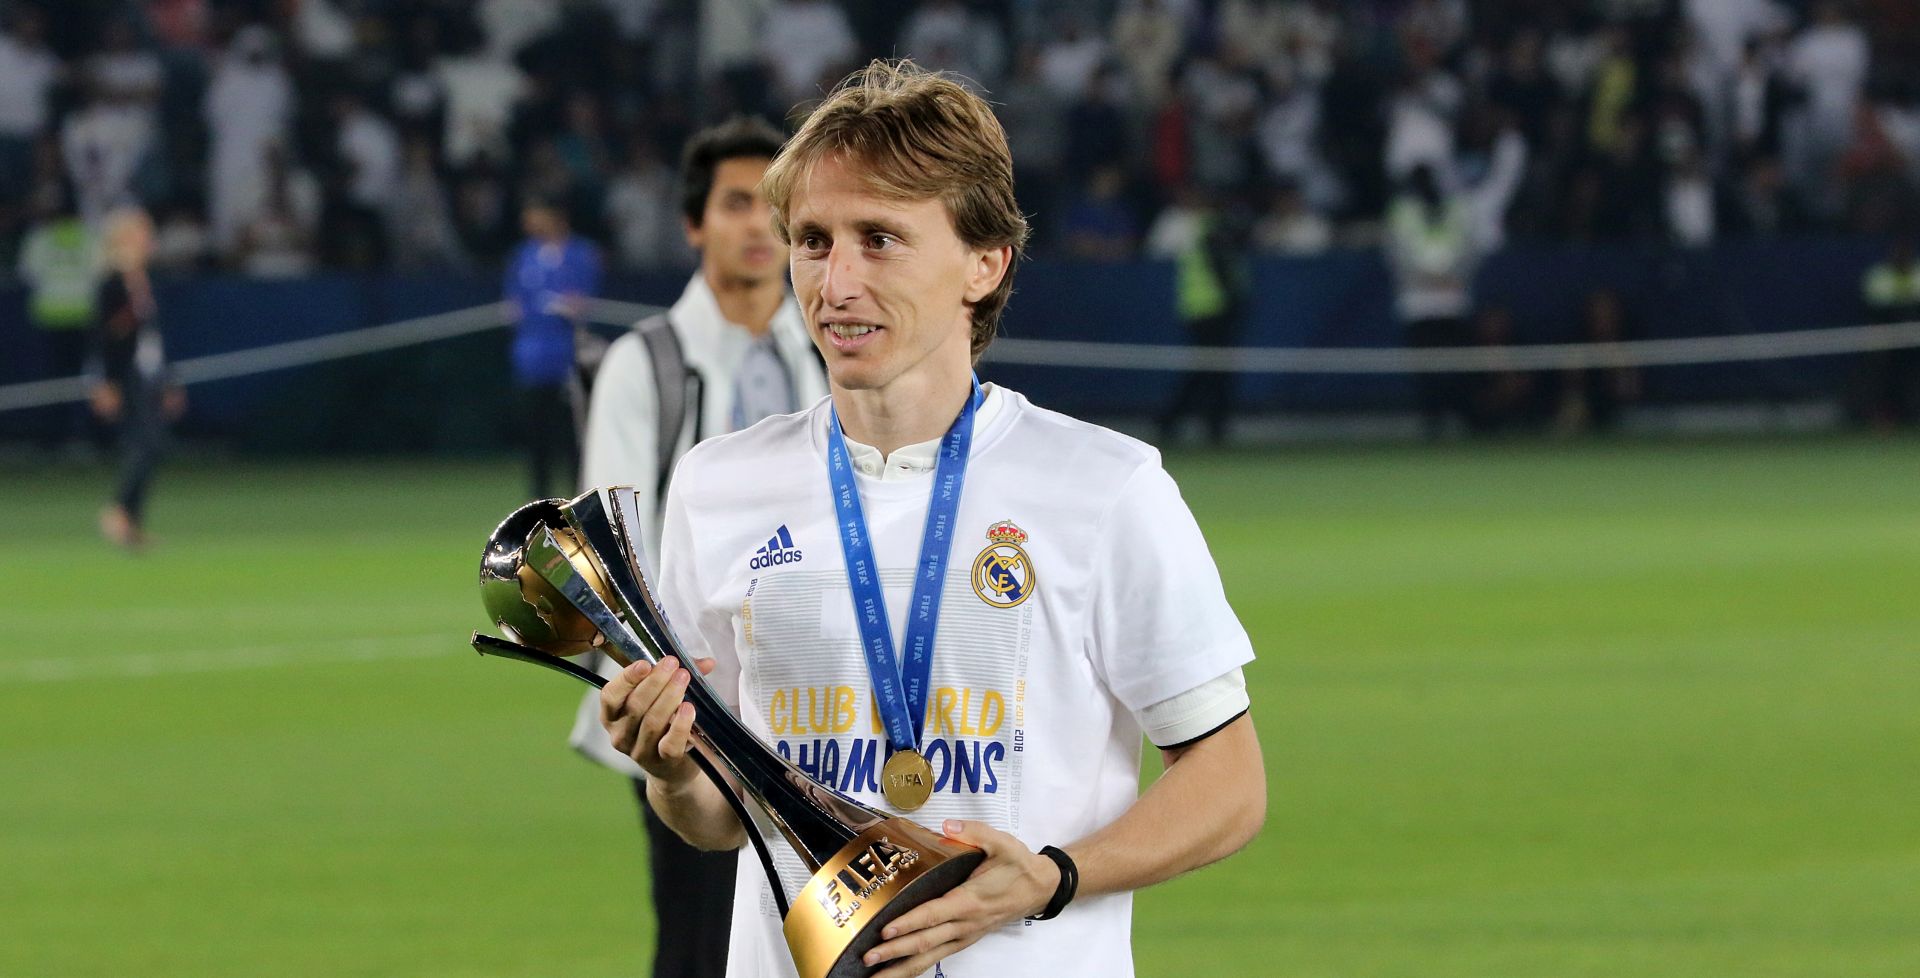 epa07245783 Luka Modric of Real Madrid CF celebrates with the trophy of FIFA Club World Cup 2018 after winning the final match against Al Ain FC in Abu Dhabi, United Arab Emirates, 22 December 2018.  EPA/MAHMOUD KHALED